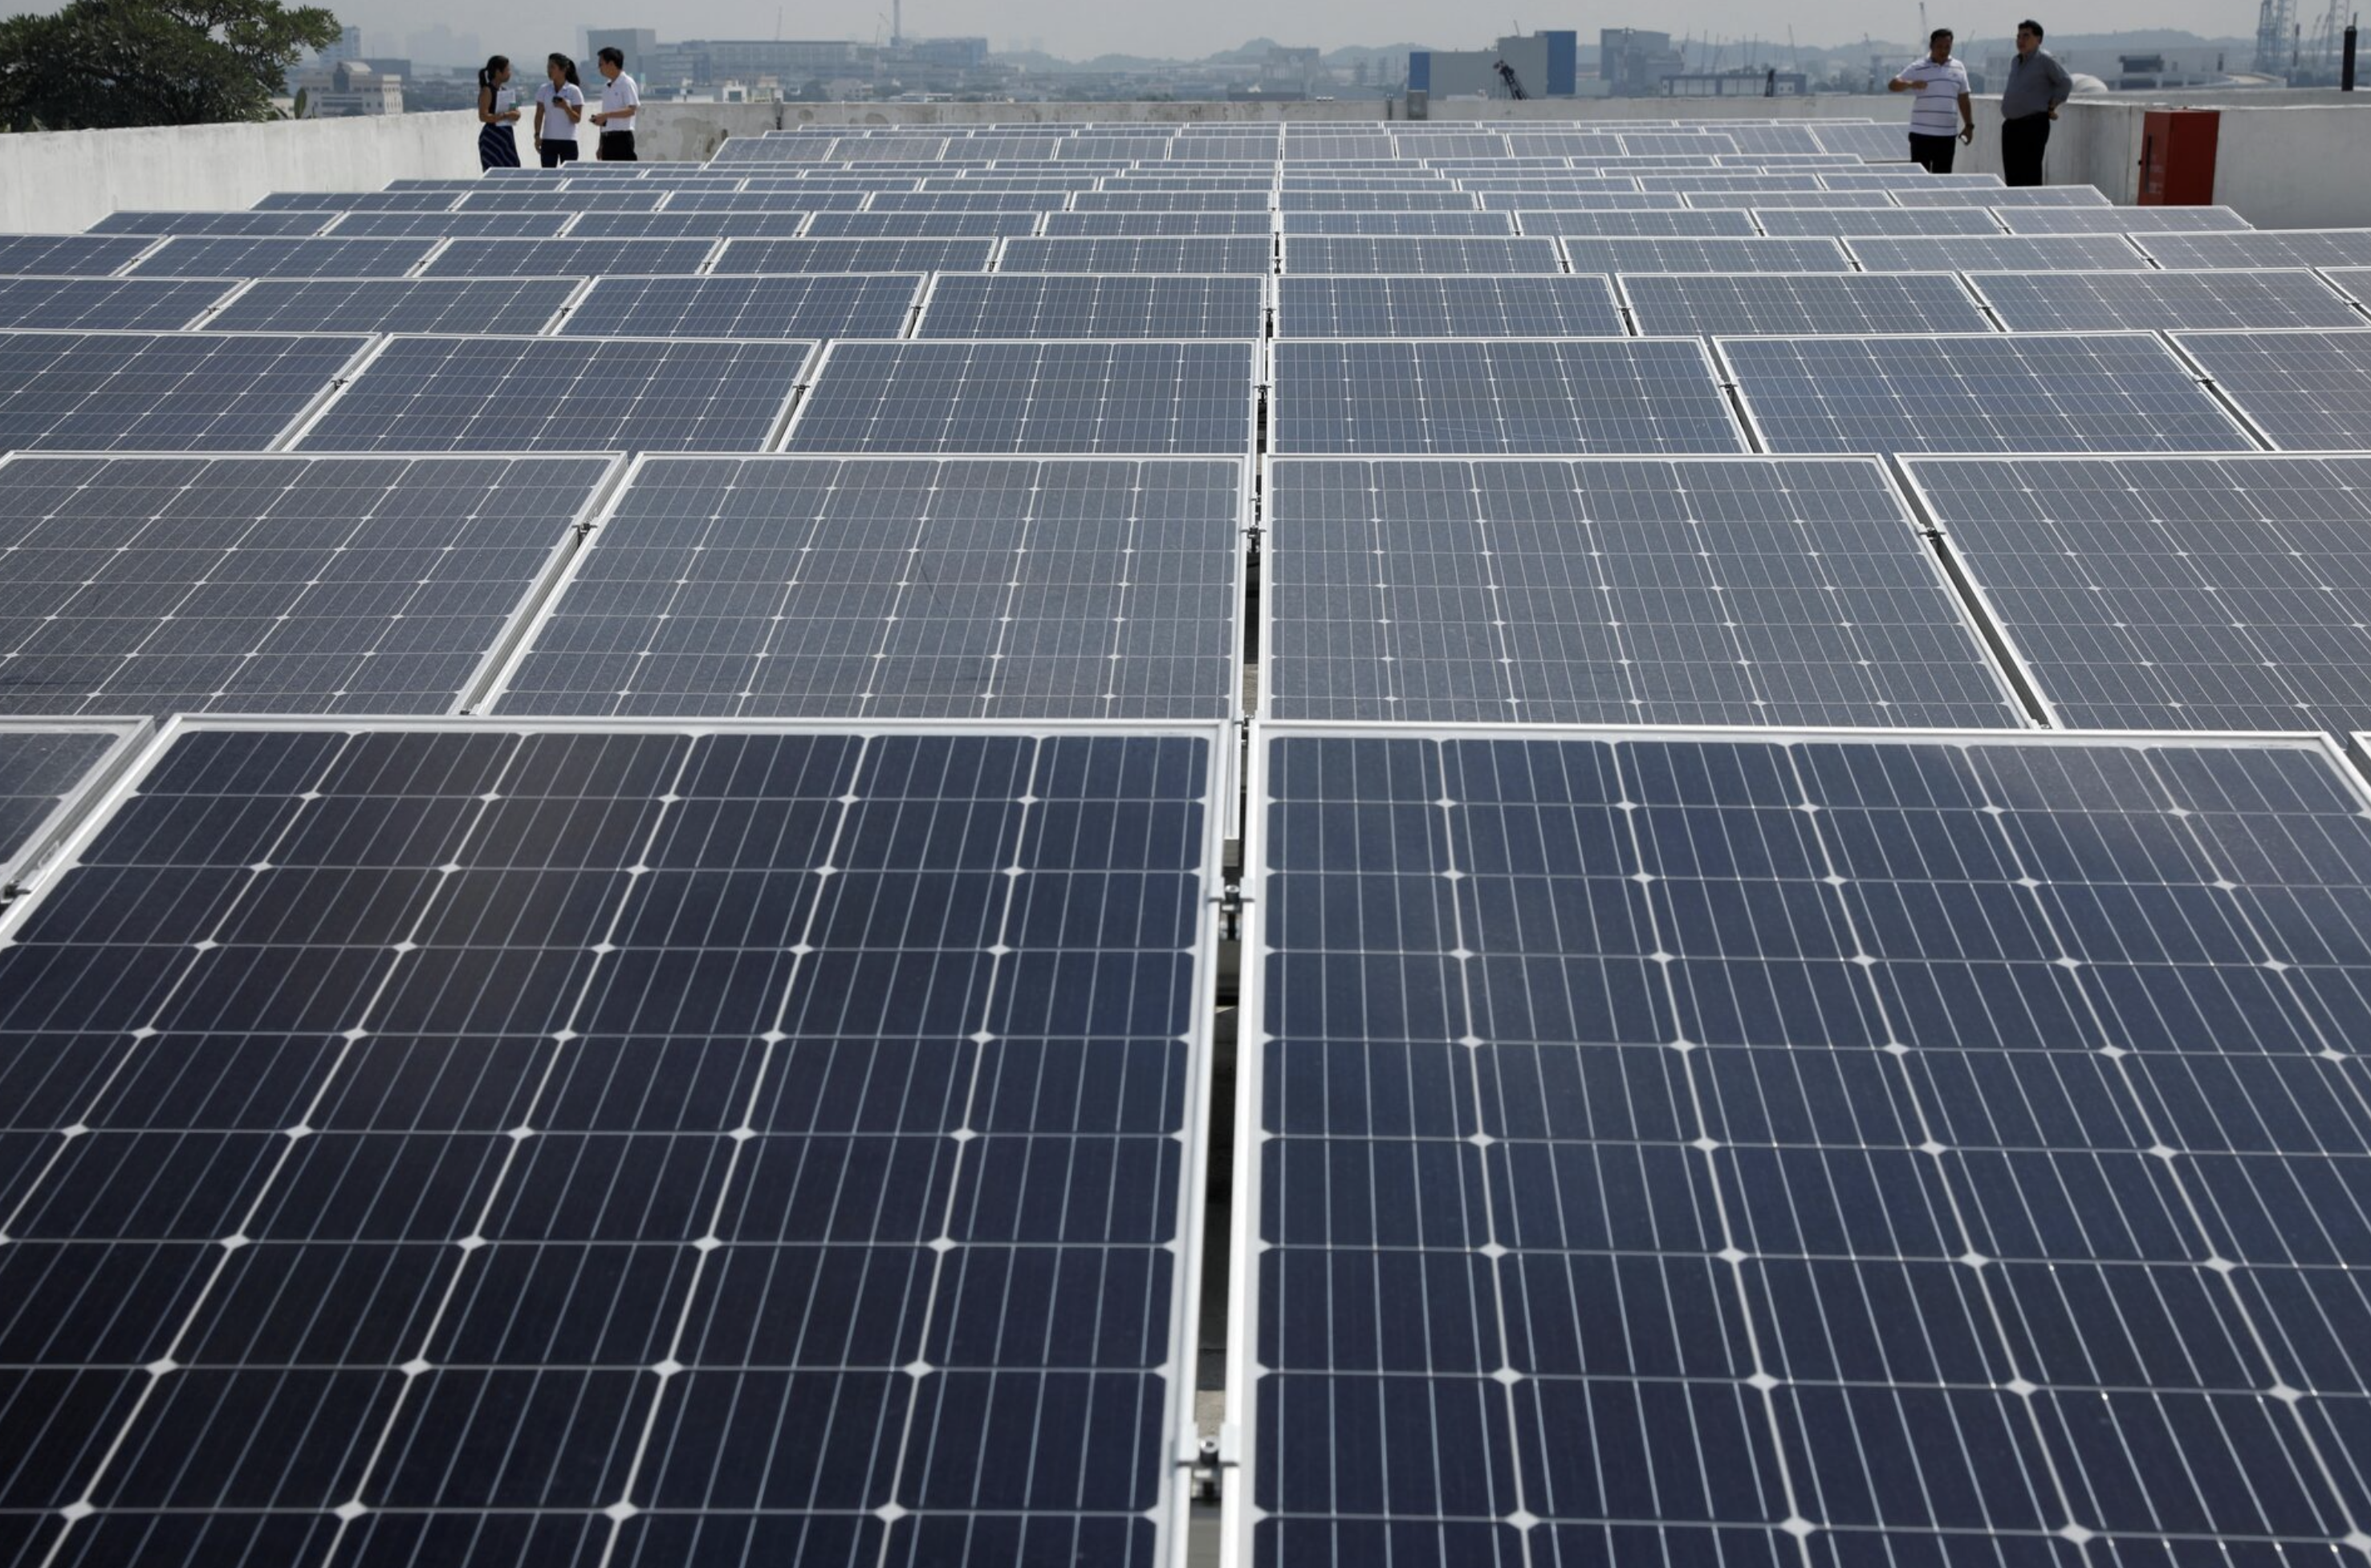 Southeast Asia 'woefully off track' on green investment, Bain says